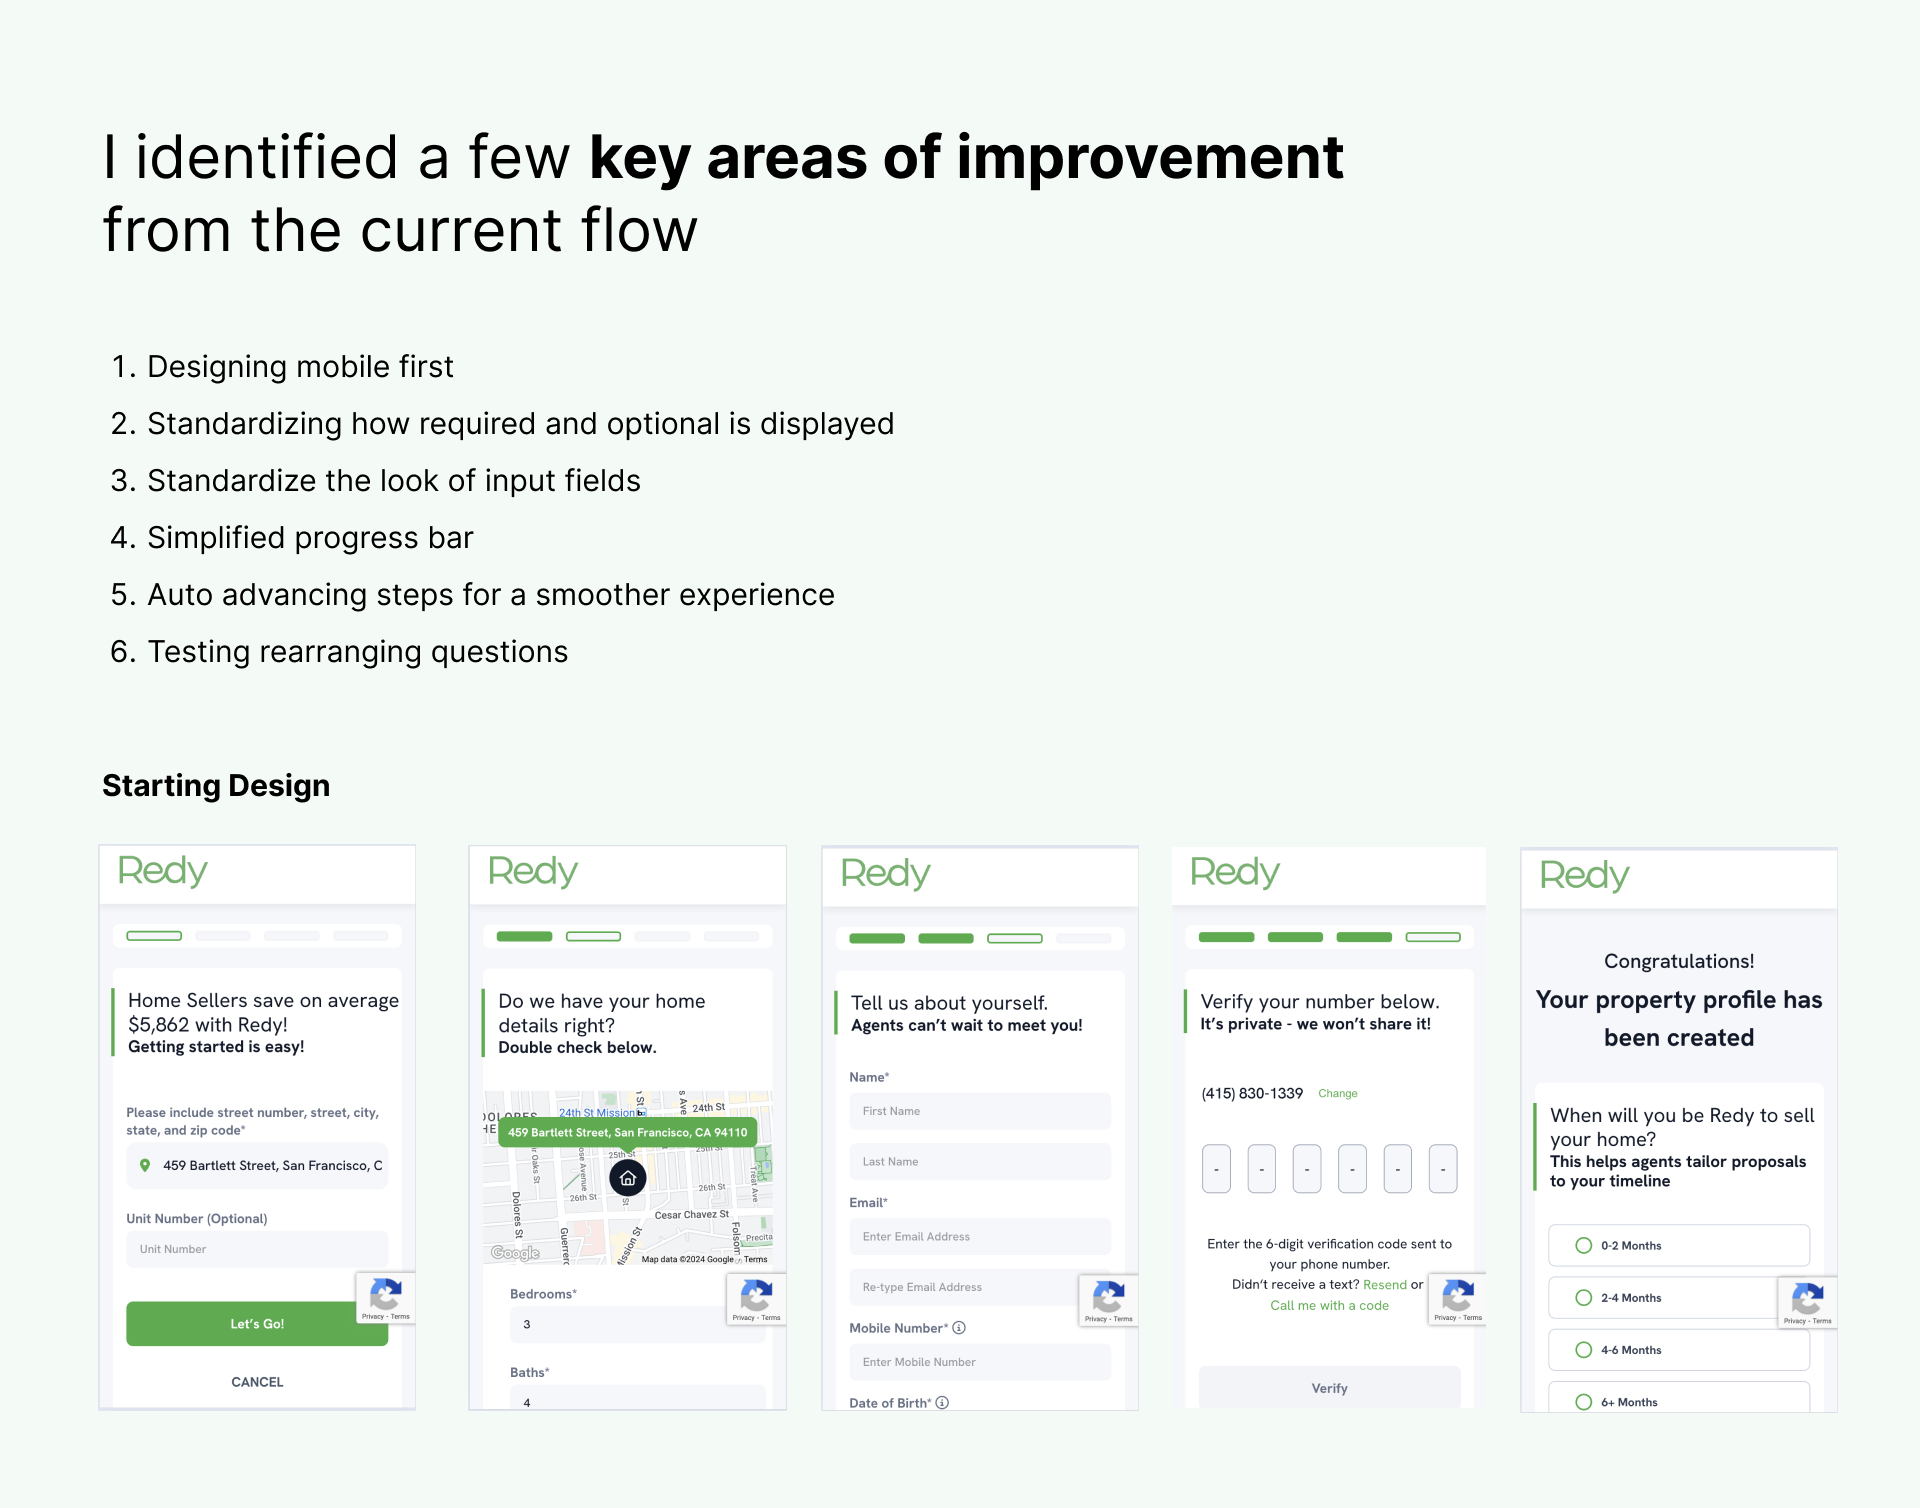 Redy Onboarding Improvements